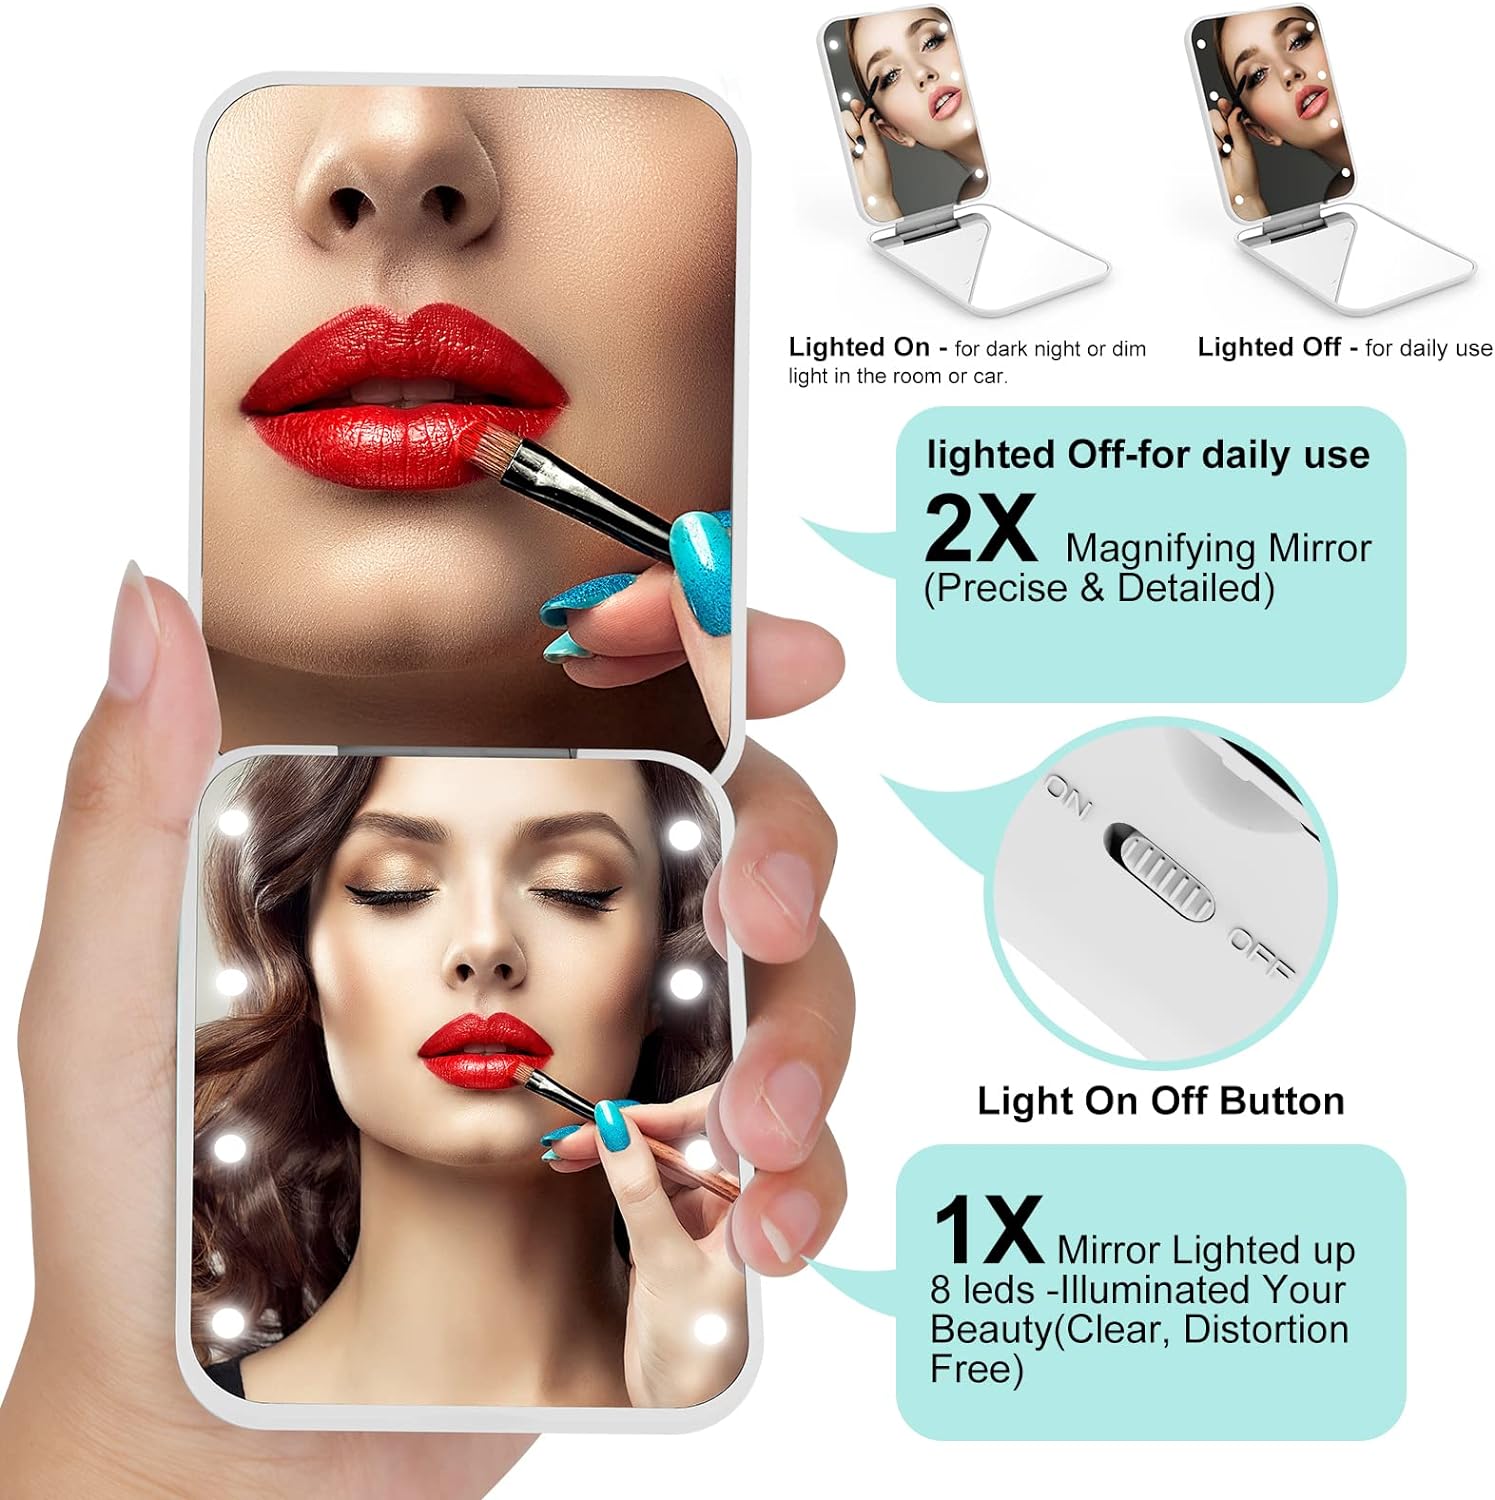 8 Led Visor Vanity Mirror Portable Pocket Mirror 2X Magnify Purse Mirror Lighted Comestic Mirror Mini Tail Comb Travel Makeup Mirror Shaving Power Battery Included Mirror Folded Beauty Mirror Gift